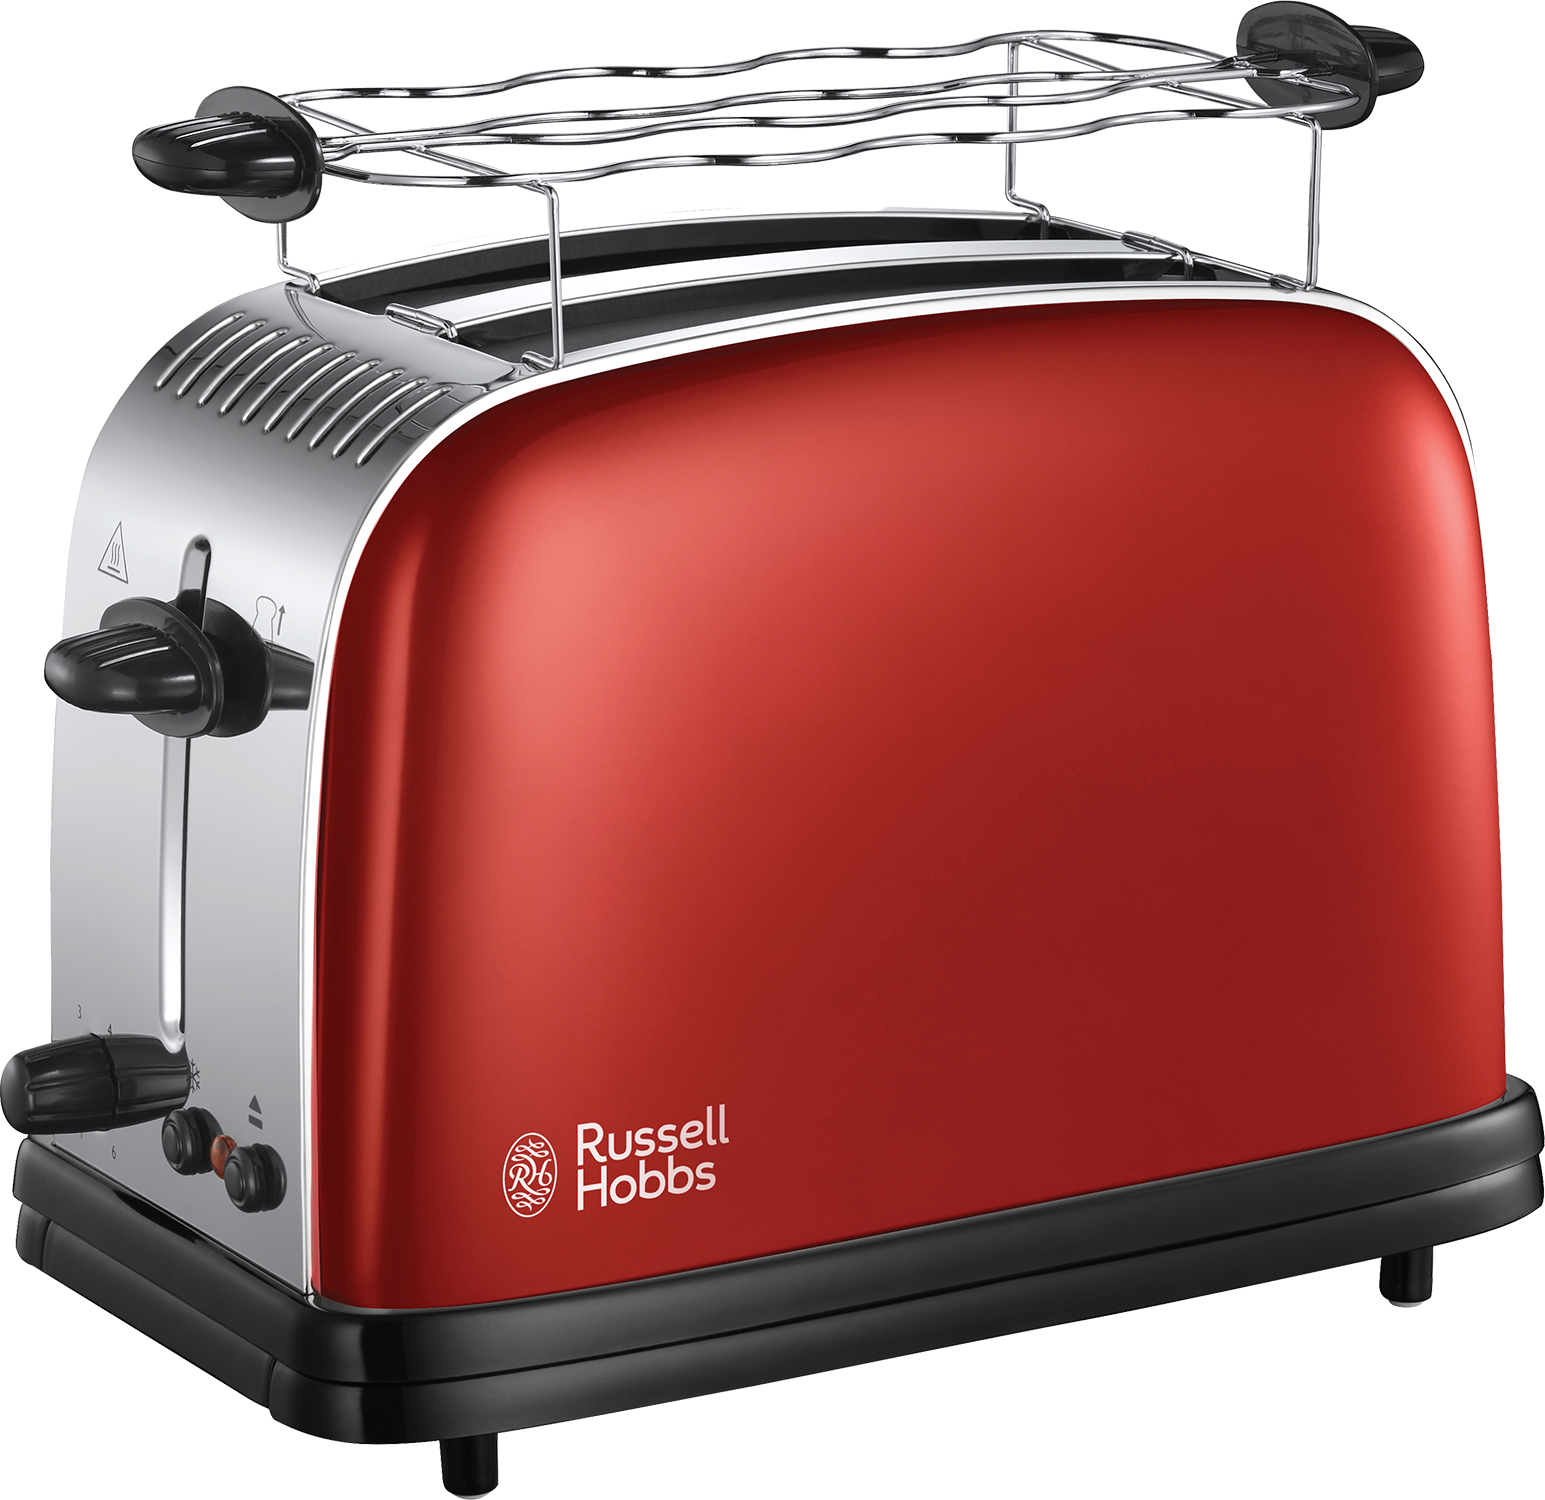 Russell Hobbs Toaster Flame Red 23330-56